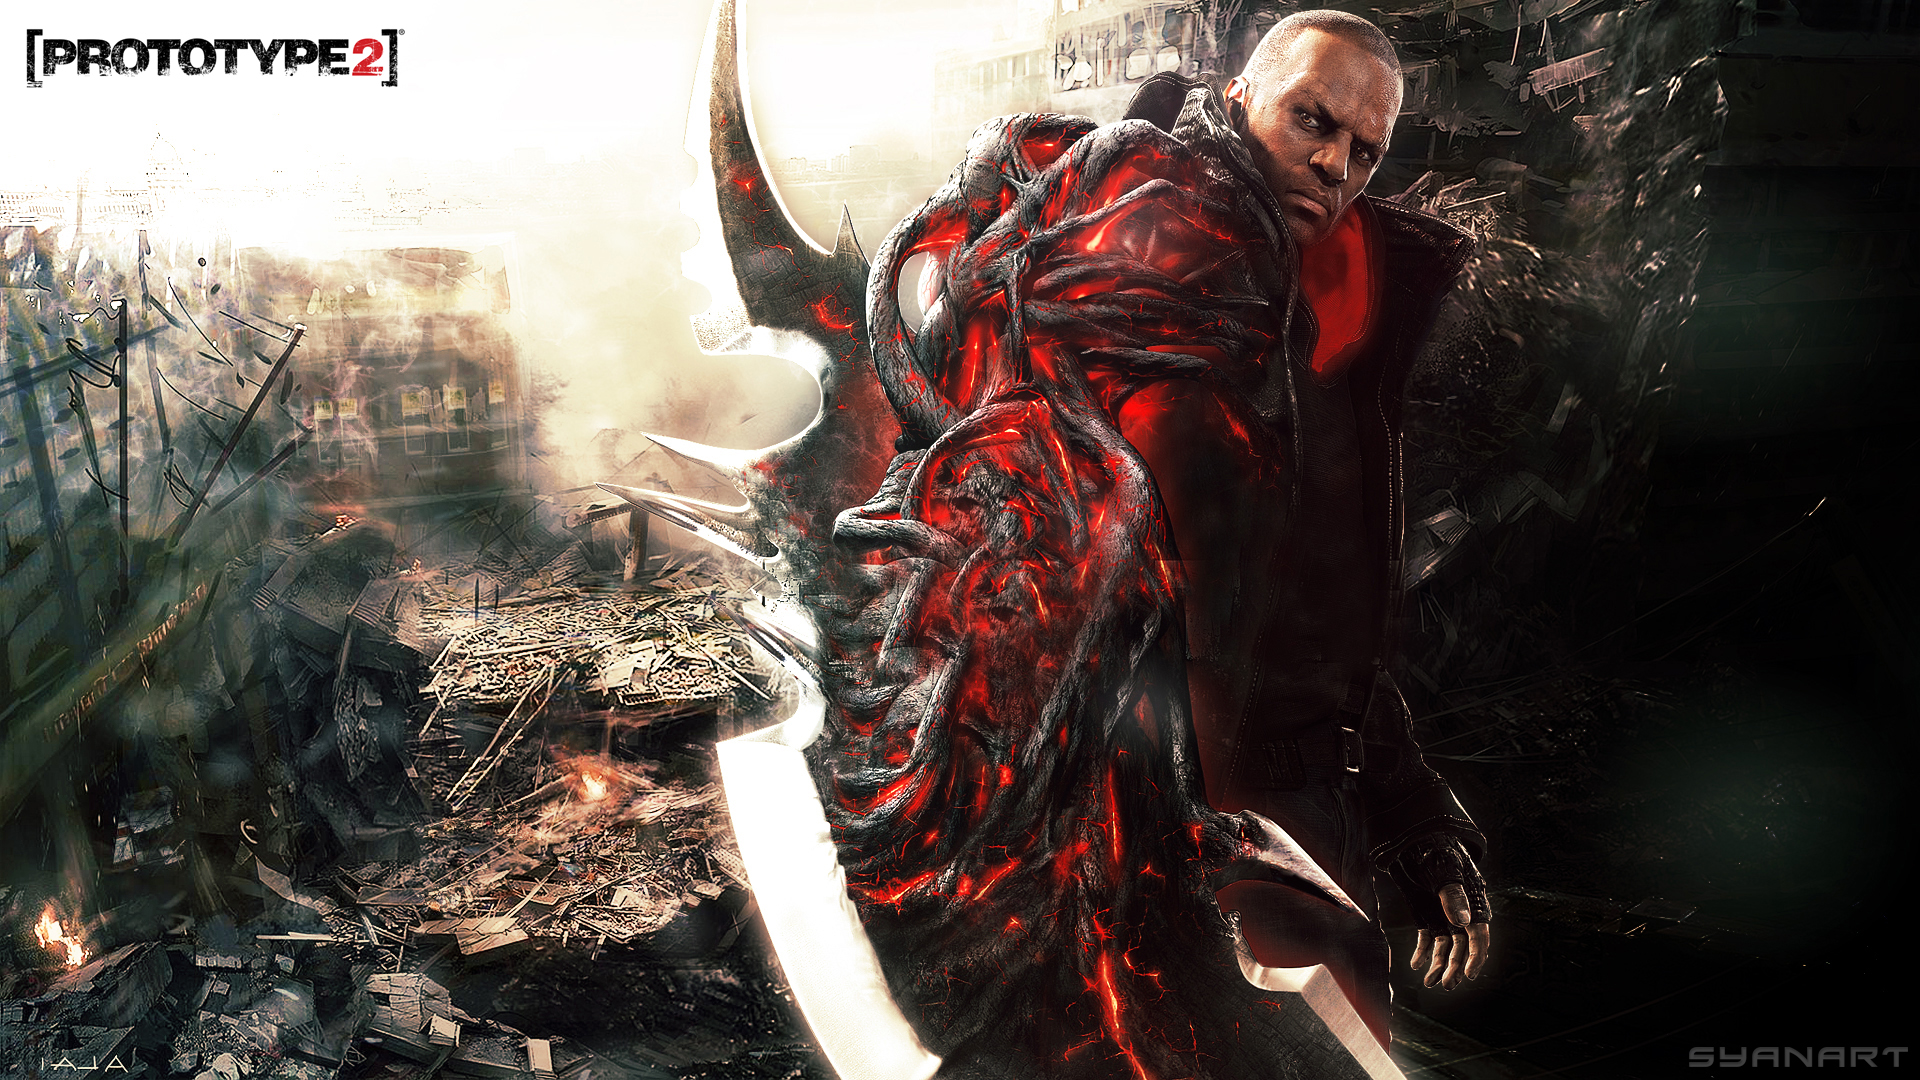 Video Game Prototype 2 HD Wallpaper | Background Image